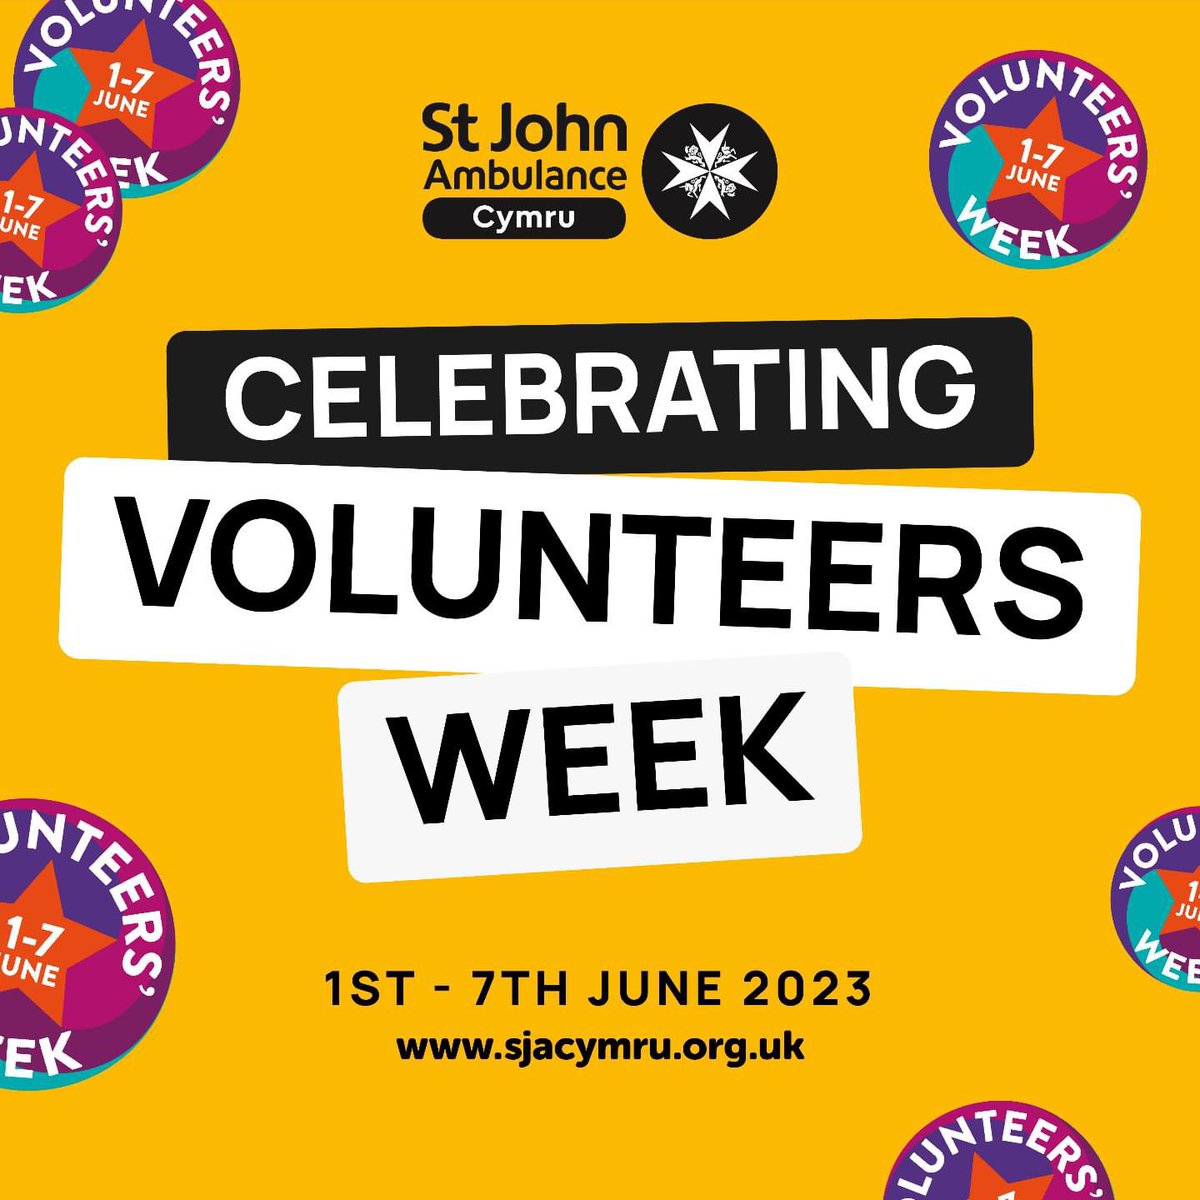 Happy #VolunteersWeek2023! Shoutout to Josh for his unwavering support to our division. His dedication + selflessness are greatly appreciated. Thank you for all your hard work and commitment to making a difference! #VolunteerAppreciation @SJACymru